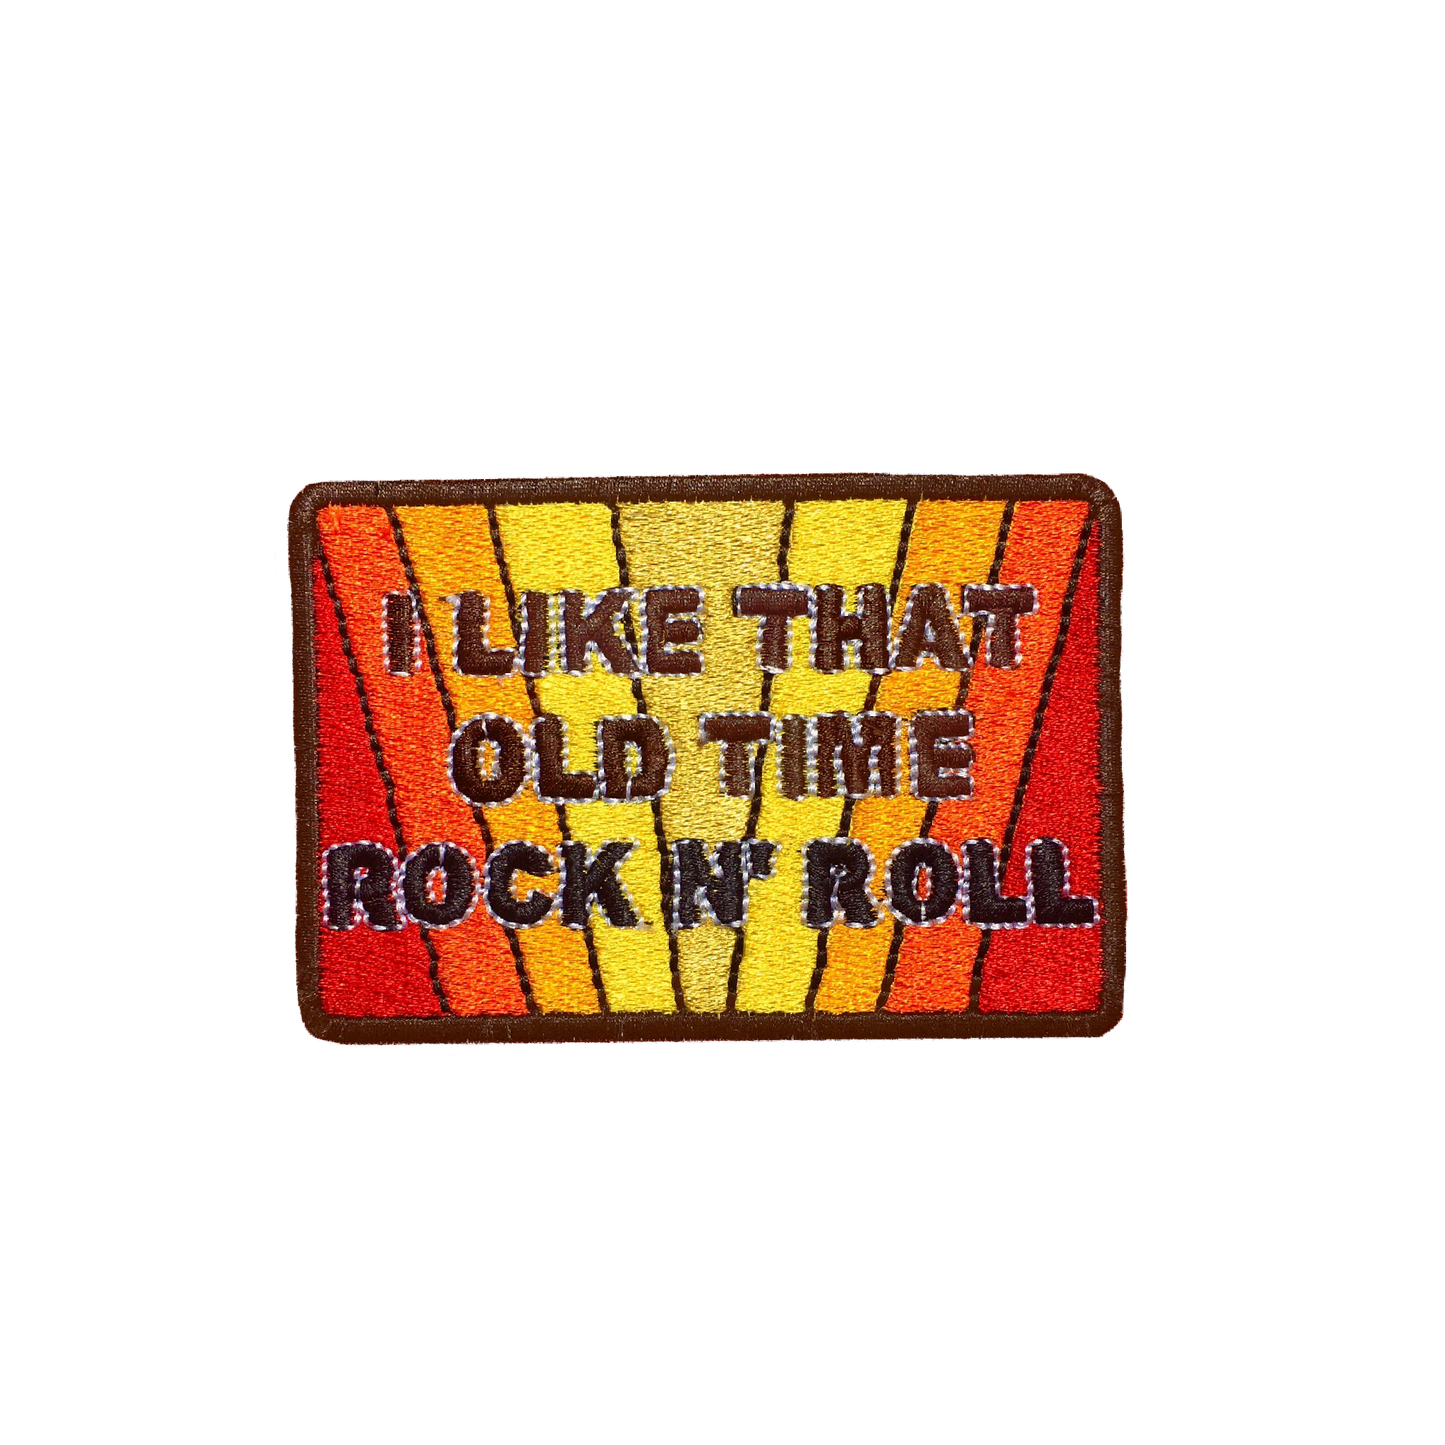 The Old Time Rock and Roll Patch